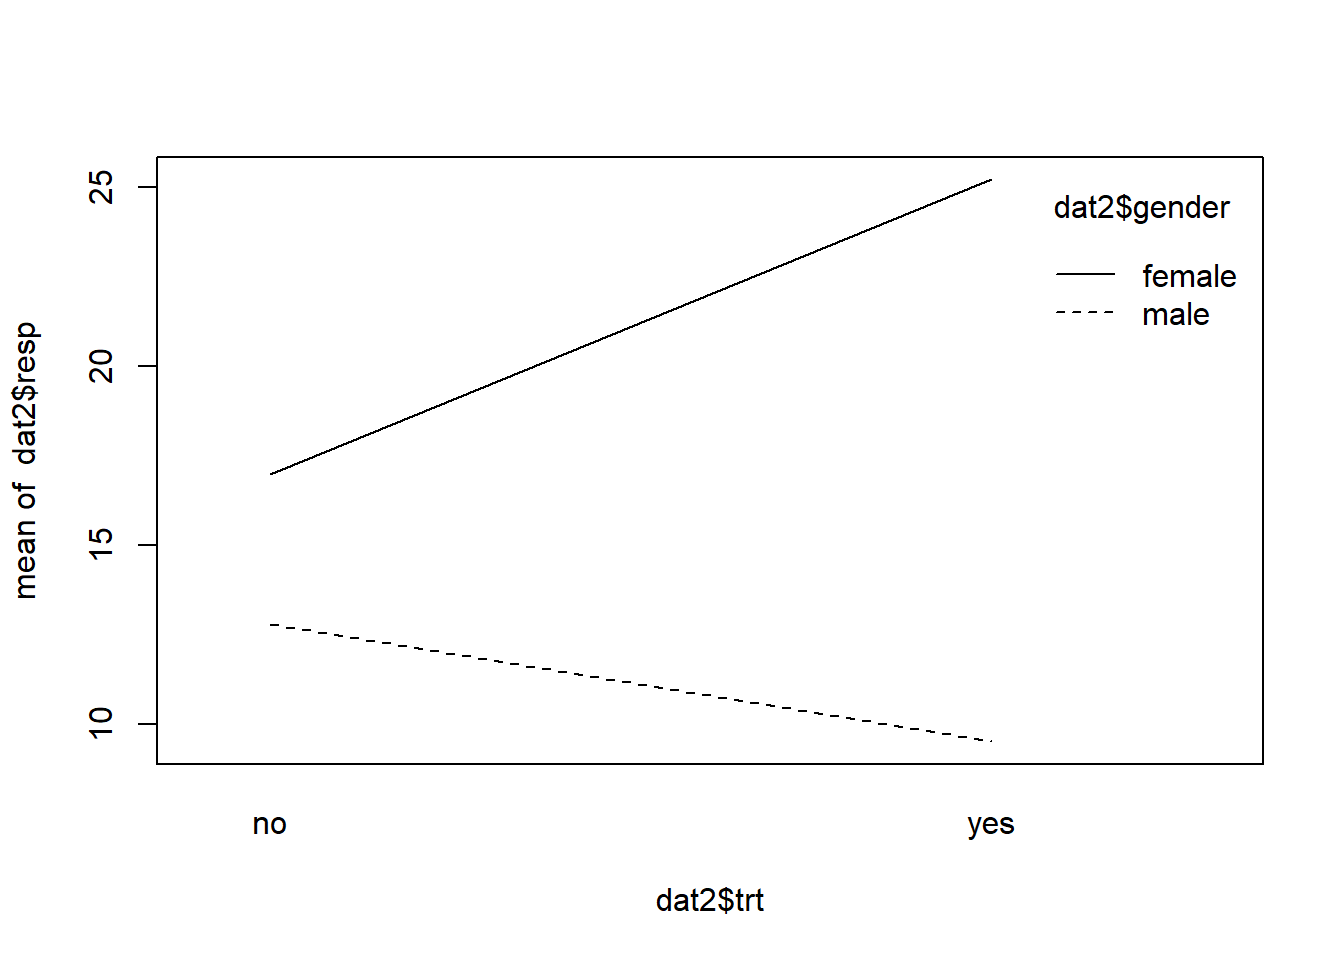 Interaction plot of treatment and gender.